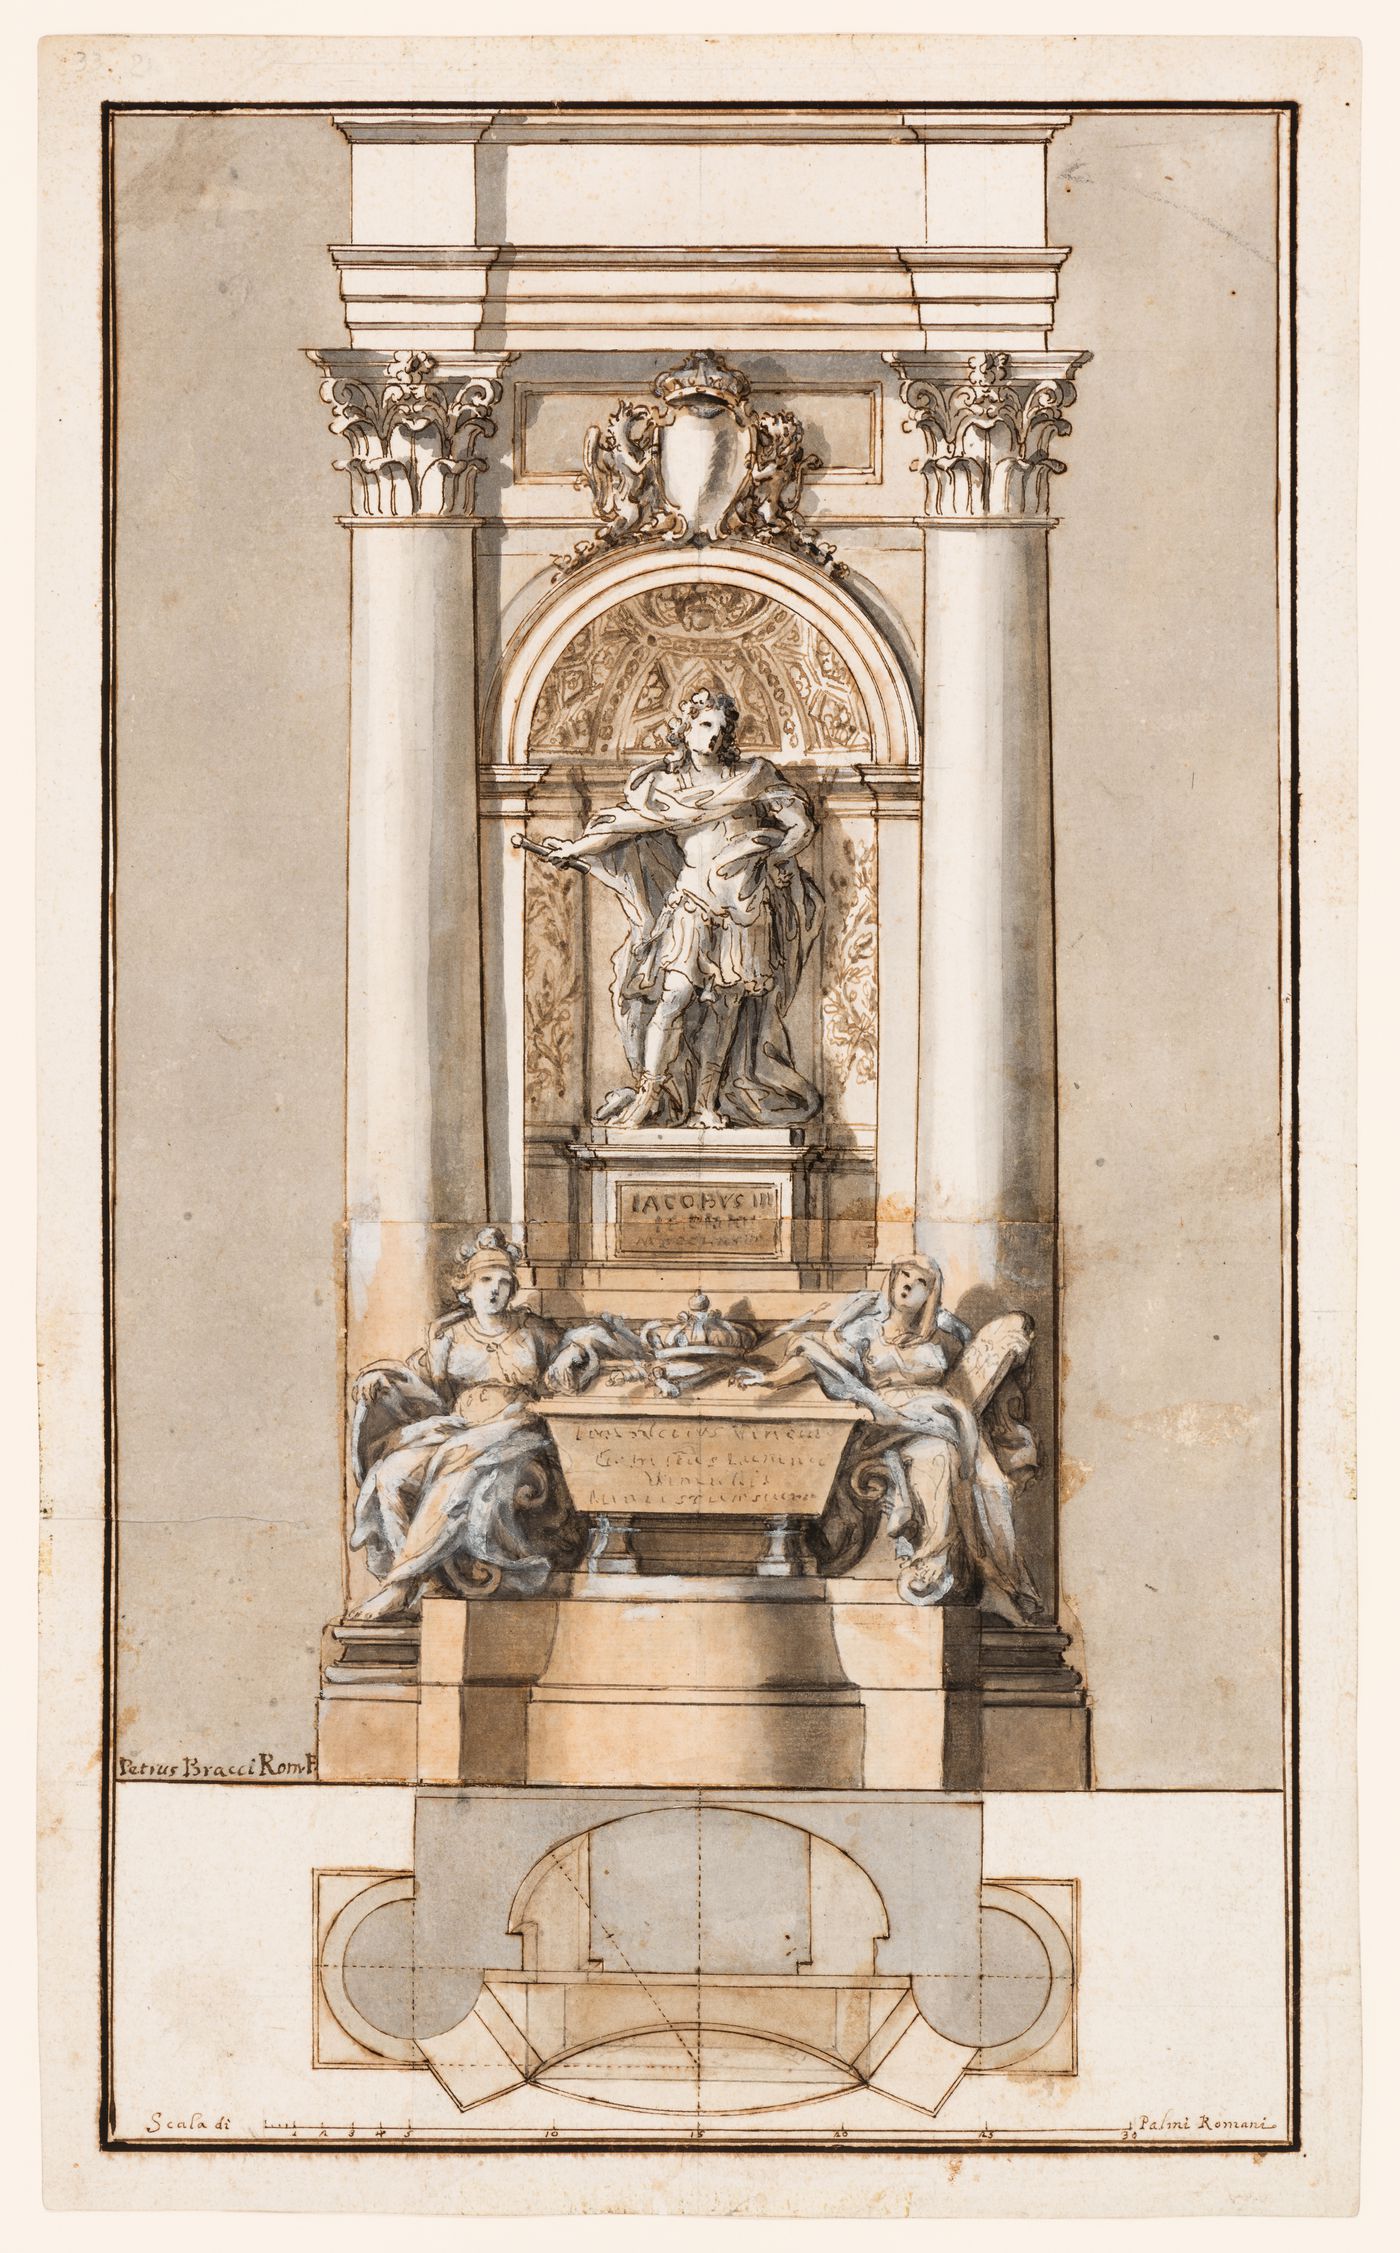 Design for a monument to King James III Stuart, Rome